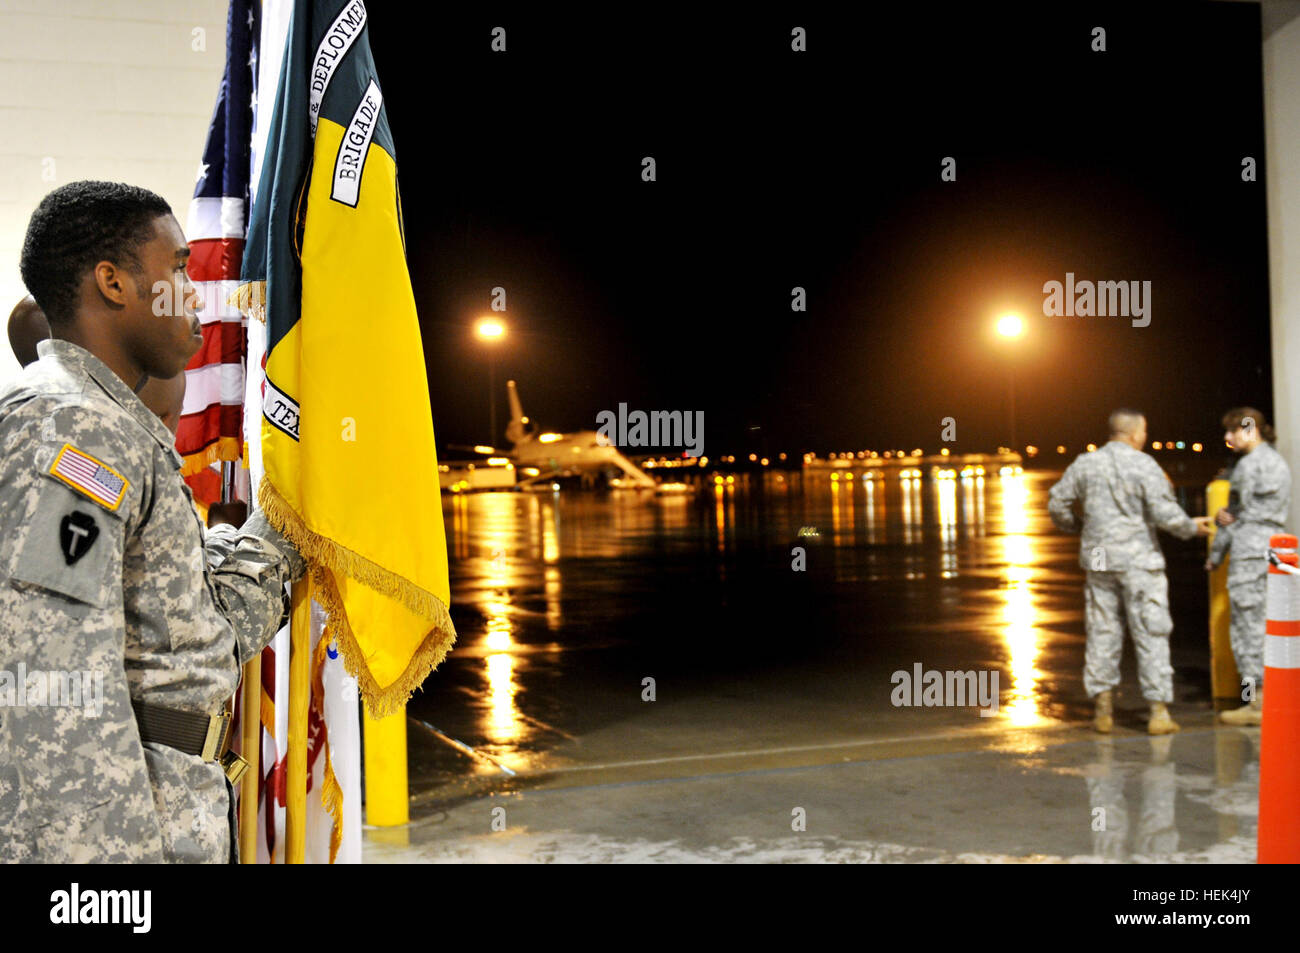 In this image released by the Texas Army National Guard, Spc. Daniel McMurray of Bryan, Texas, with the Honor Guard for the Mobilization and Deployment Brigade out of Fort Bliss, El Paso waits to welcome Soldiers with Alpha and Bravo Company, 1st Battalion of the 141st Infantry Regiment, 72nd Infantry Brigade Combat Team, home after their arrival at Biggs Airfield, Fort Bliss, Texas, July 12. The two units are returning from Camp Victory, Baghdad after deploying to Iraq with the 72nd IBCT in December 2009. The soldiers performed a variety of security missions, including fixed site and convoy o Stock Photo